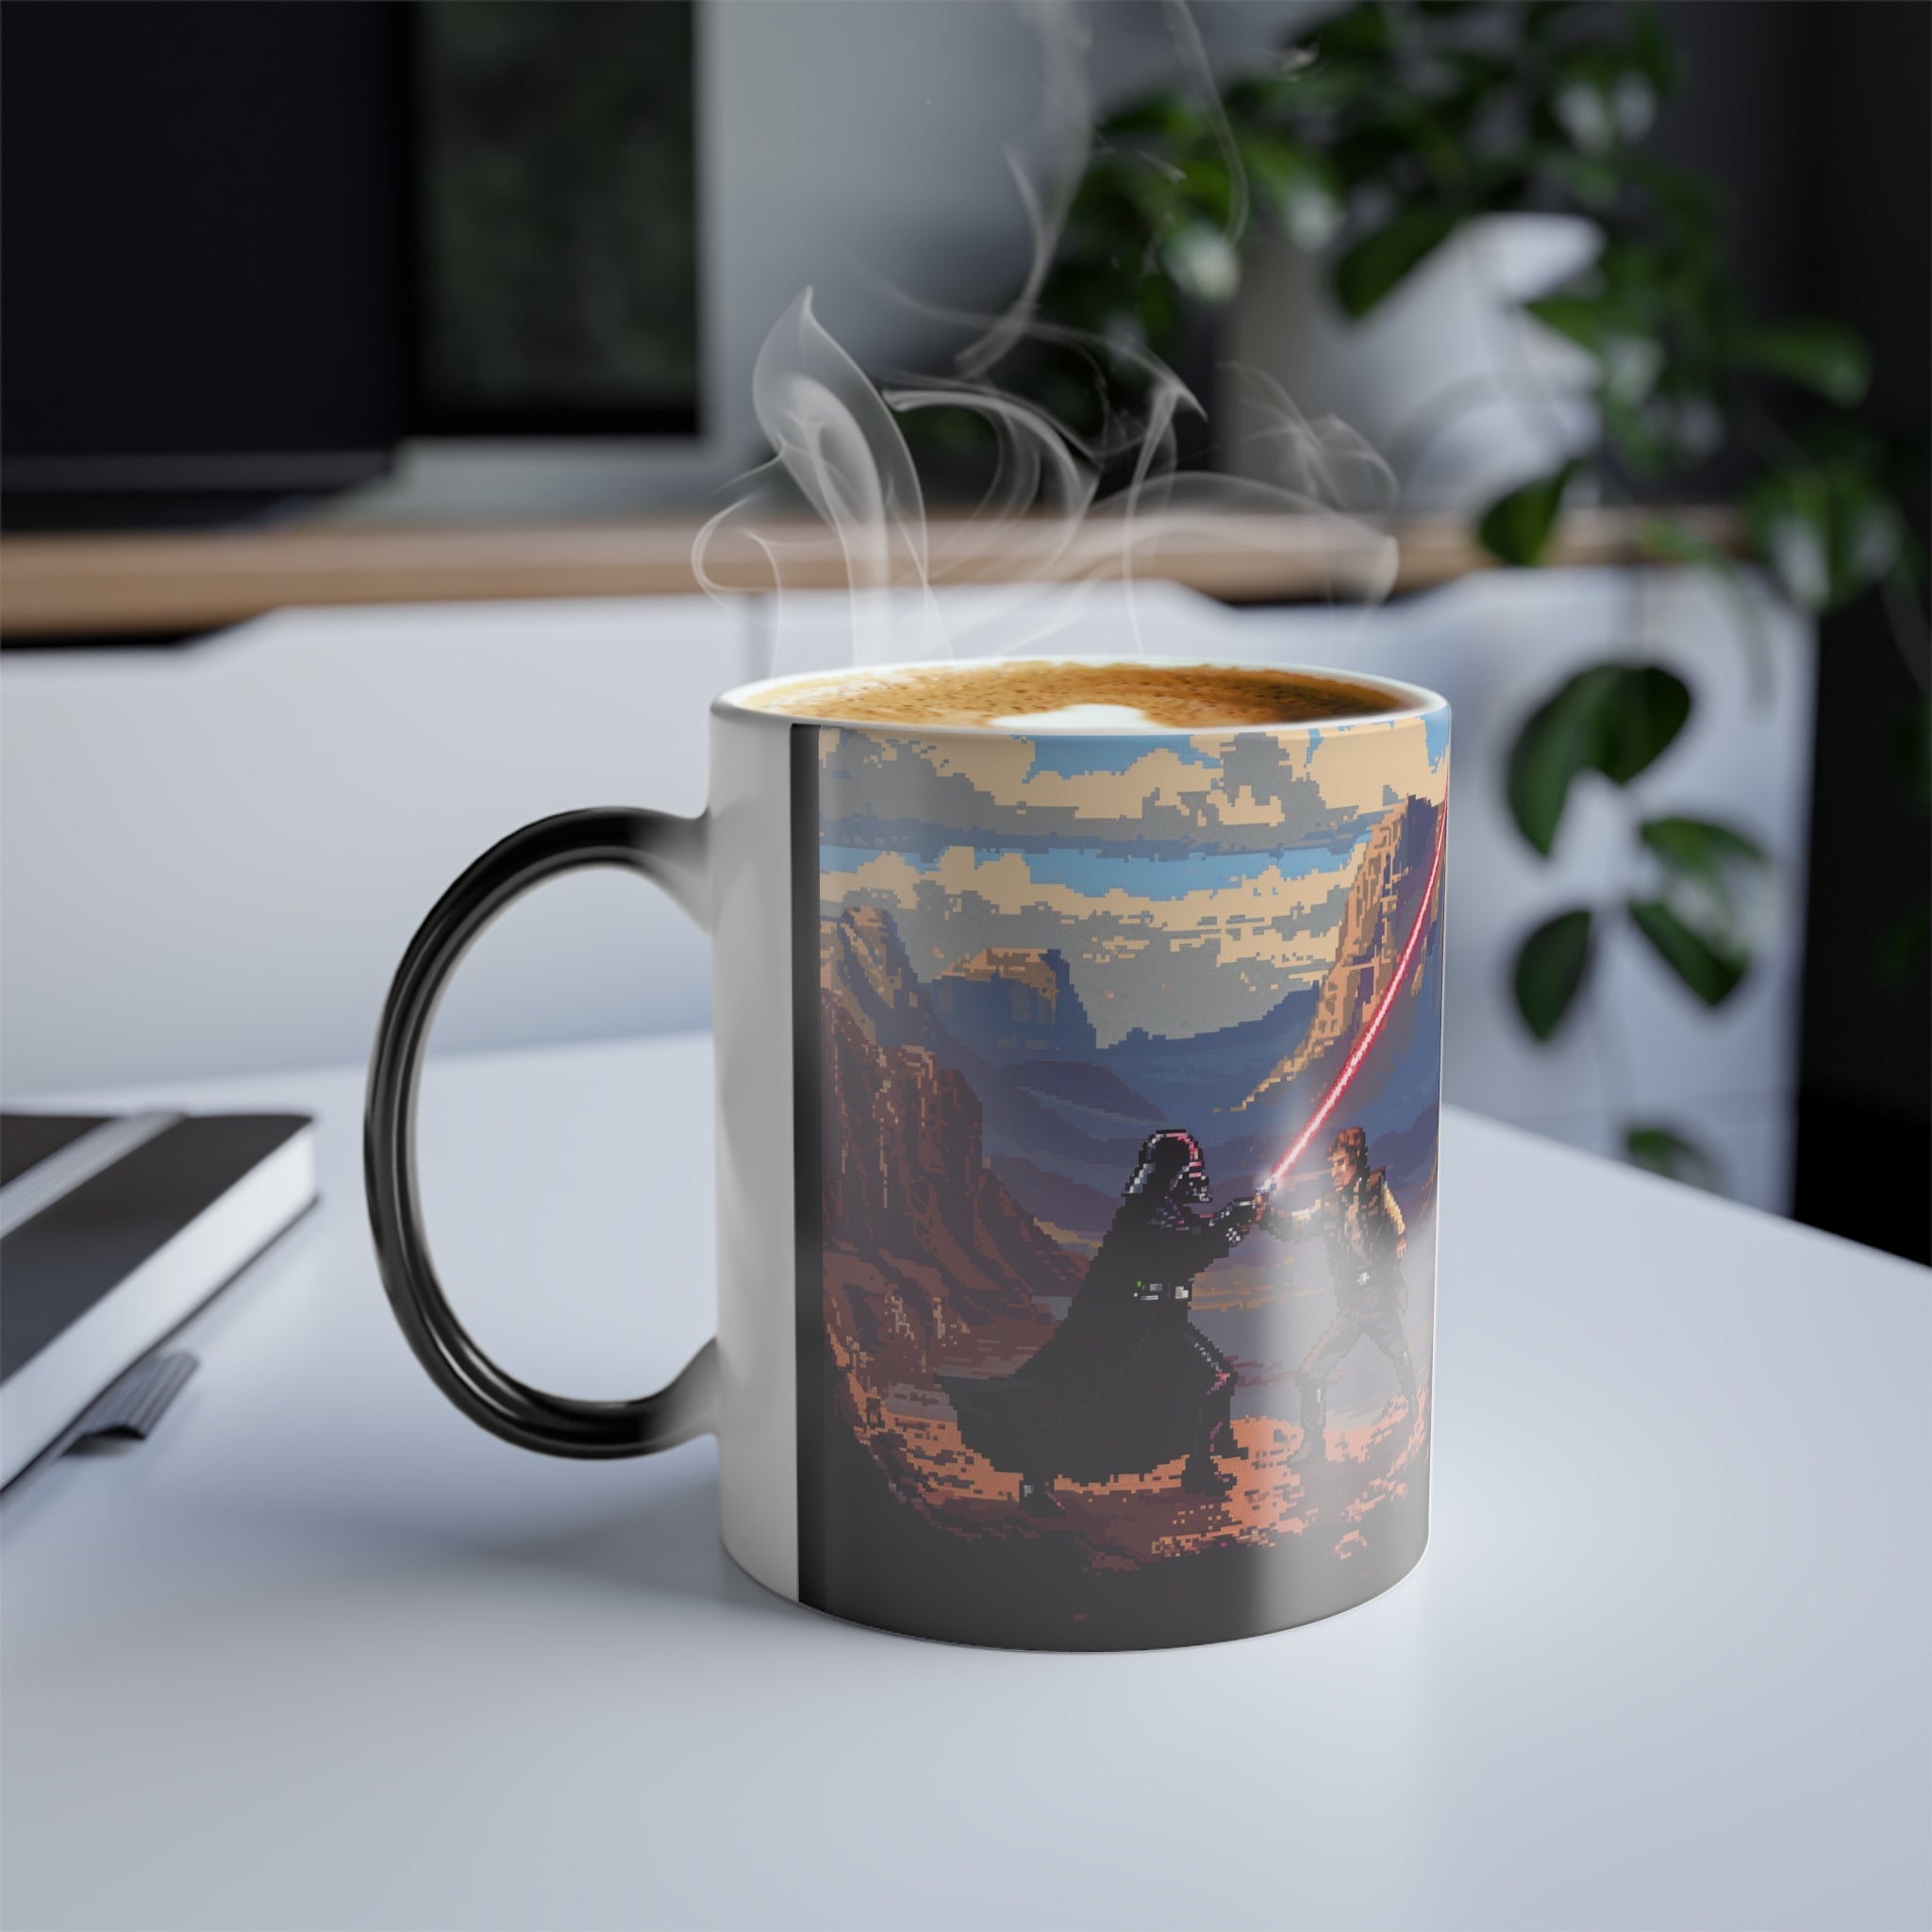 The image captures the mesmerizing transformation of the color morphing mug, starting as a sleek, mysterious black mug. As it heats up, it reveals a vivid, detailed 16-bit scene featuring Han in a daring battle against the Dark Lord, showcasing the dynamic change and the thrilling world encapsulated in this unique drinkware.